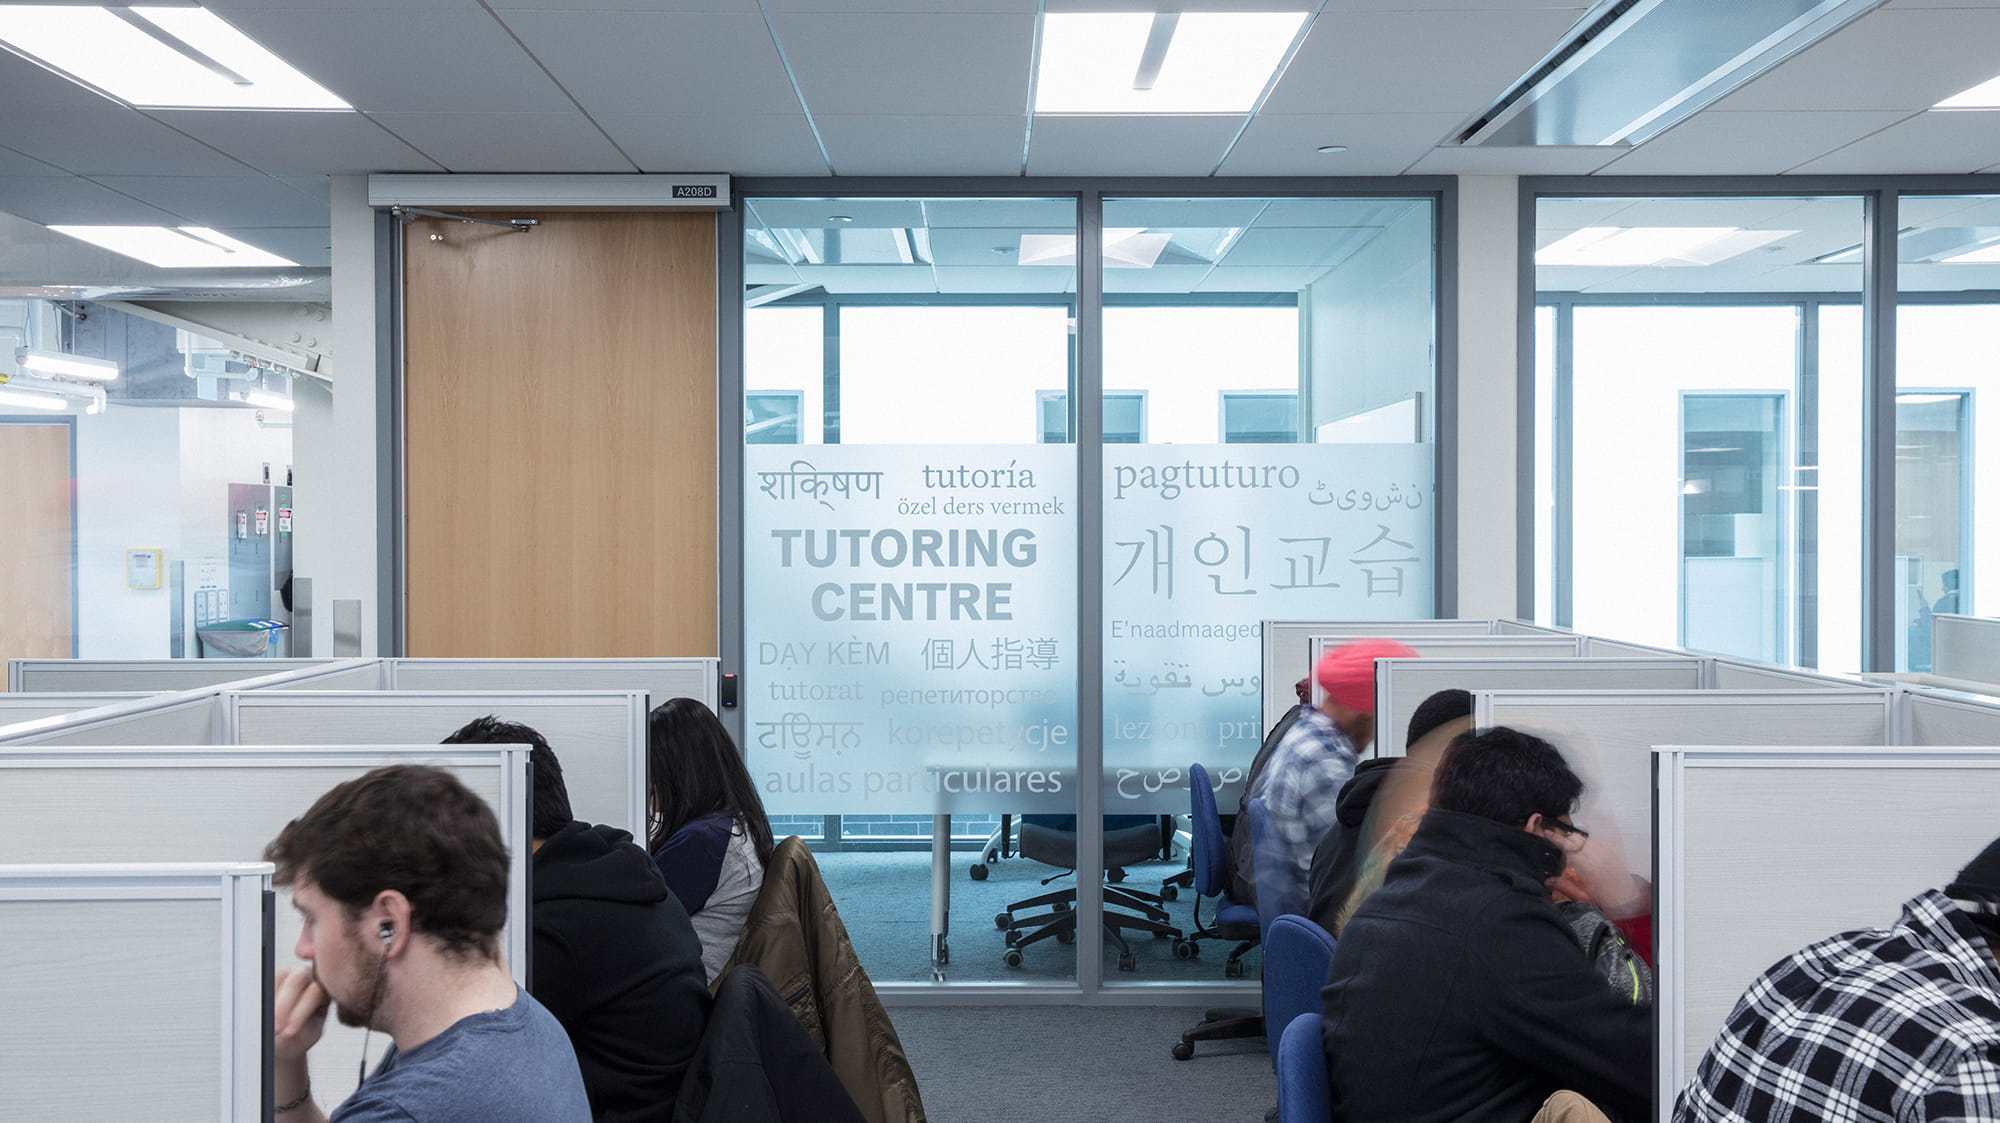 Students working at computer stations near a glass door that says "Tutoring Centre"